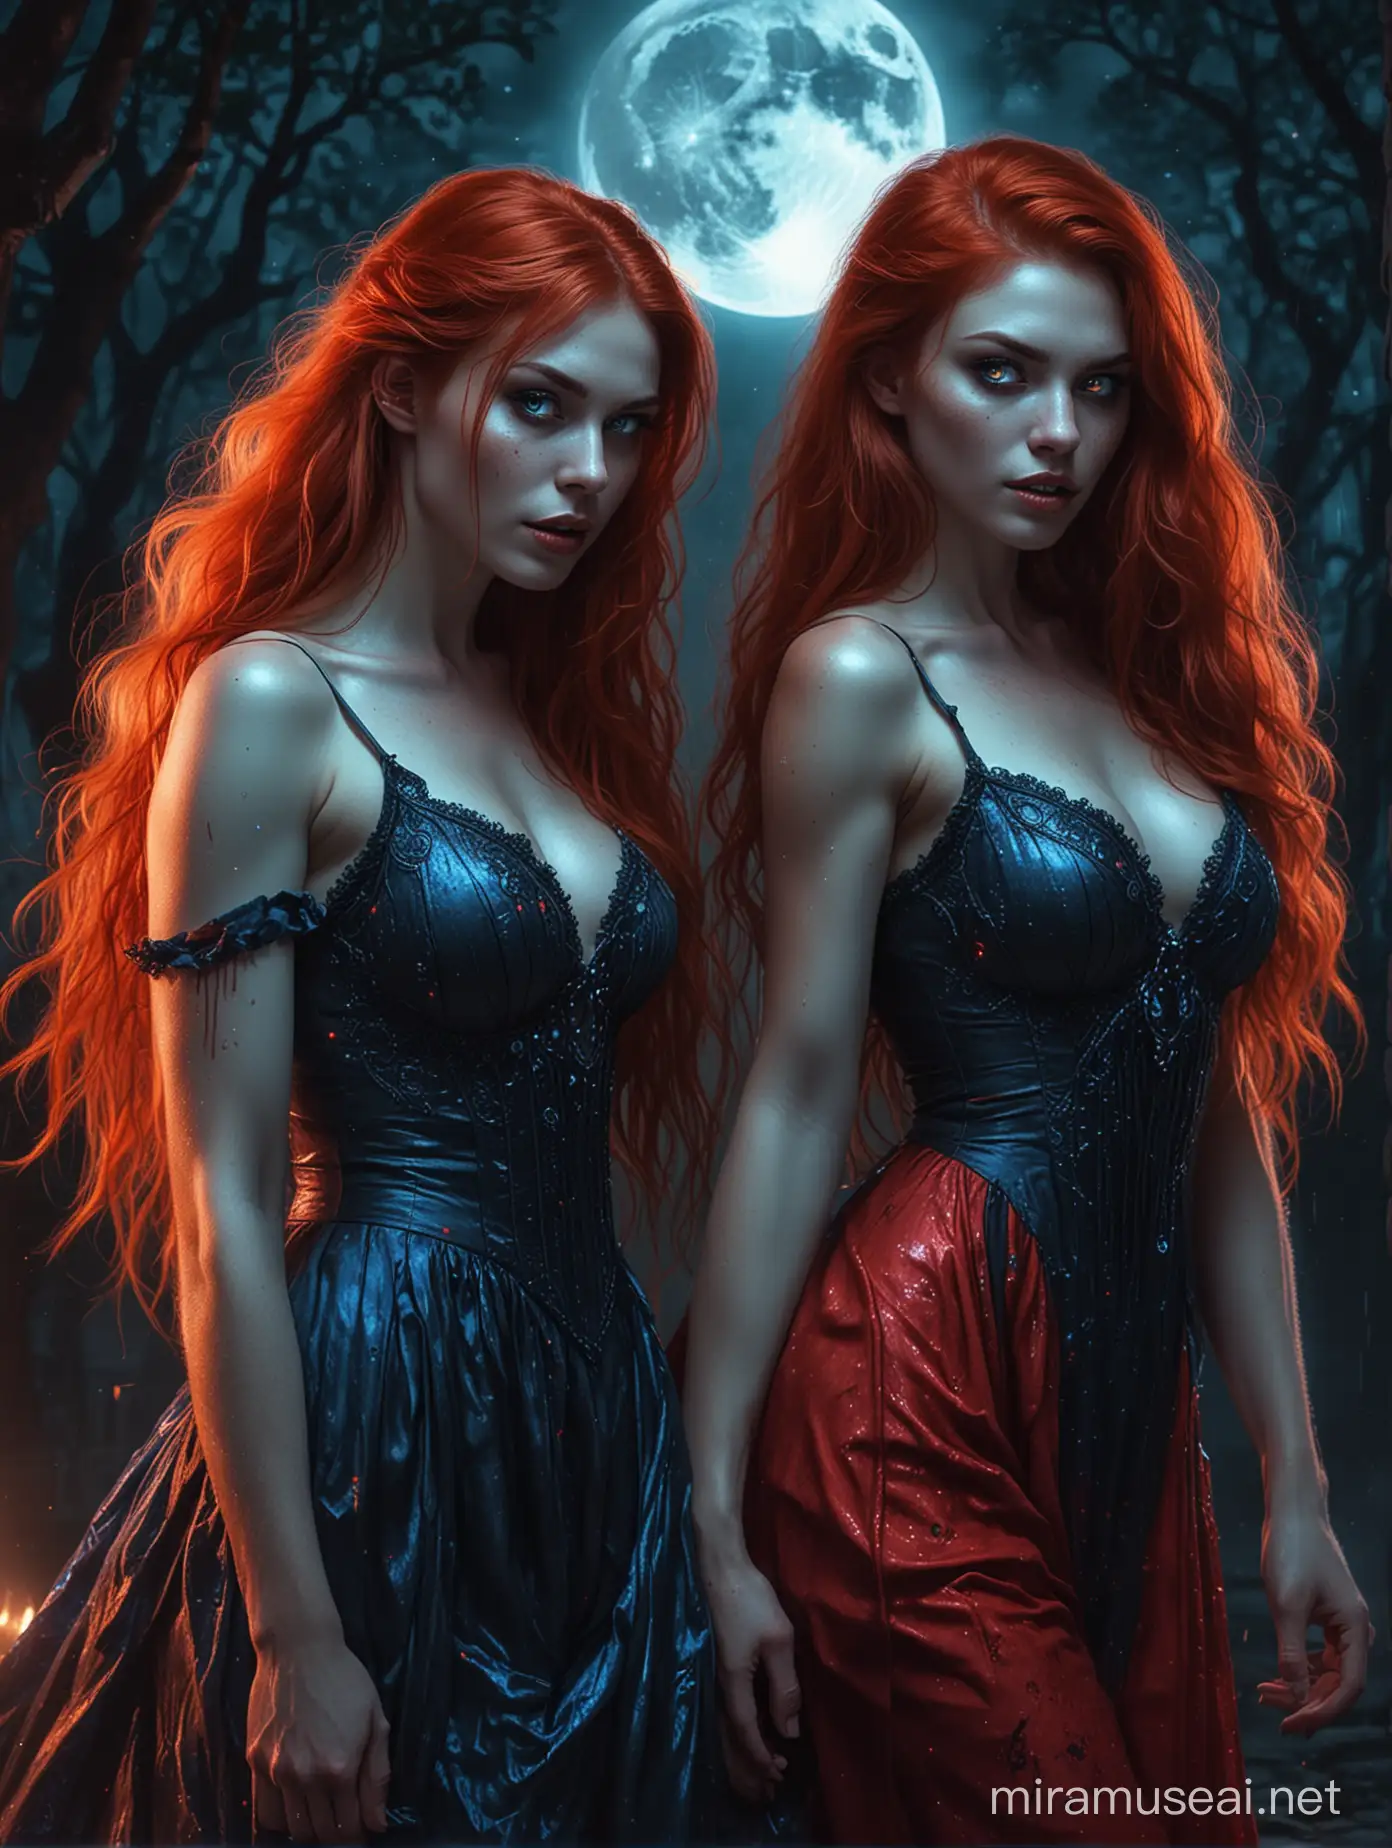 Two beautiful red hair ladies in a glowing bloody red dress and the other in a sparkling blue glowing dress with red and blue glowing eyes , leaning back to back against each other, with a mighty black creepy werewolf standing fierce behind her in the dark night, and a glowing moon with a goddess face shining inside it.